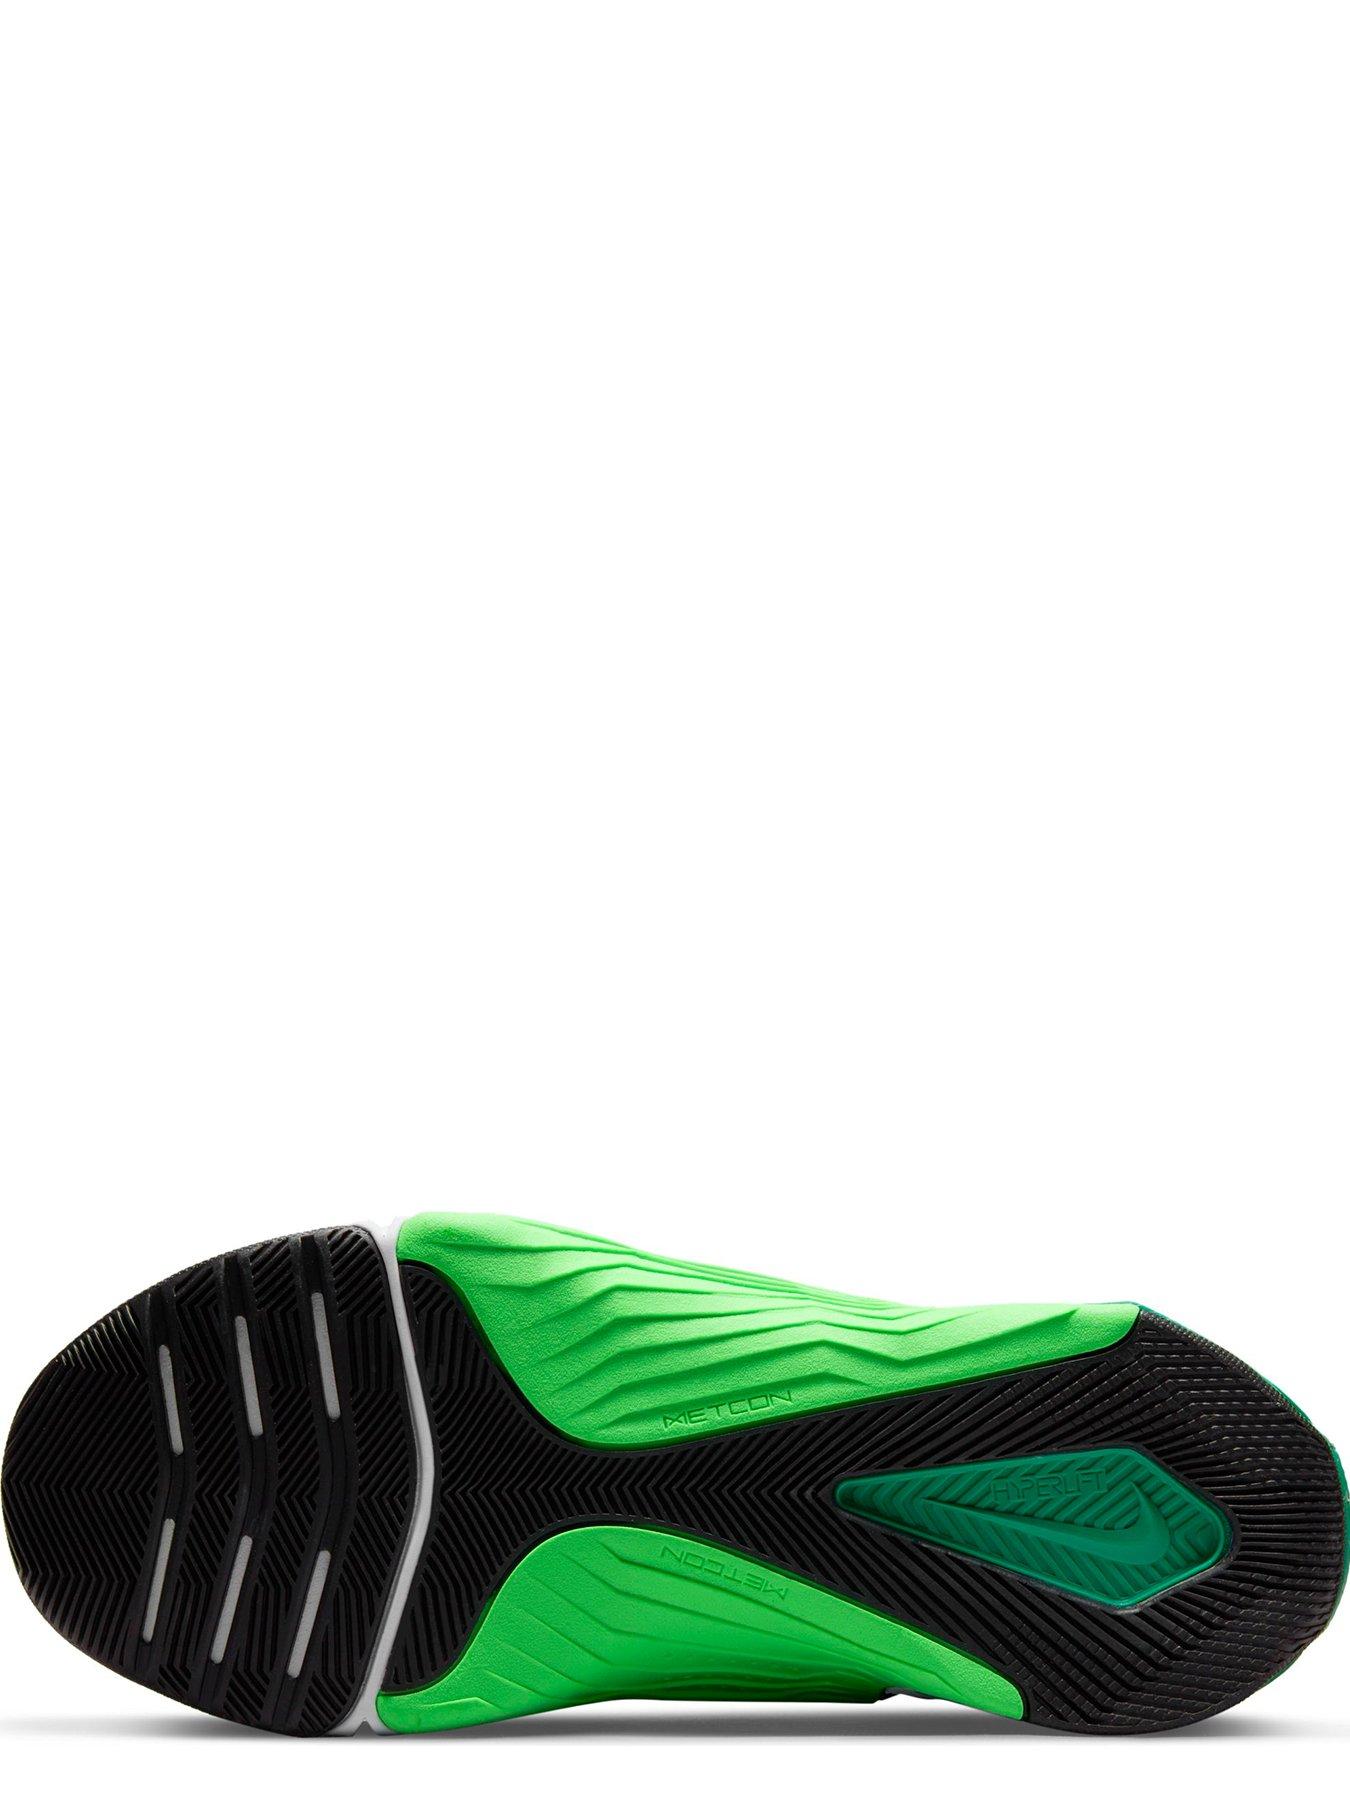 Trainers Metcon - Black/Green/Pink